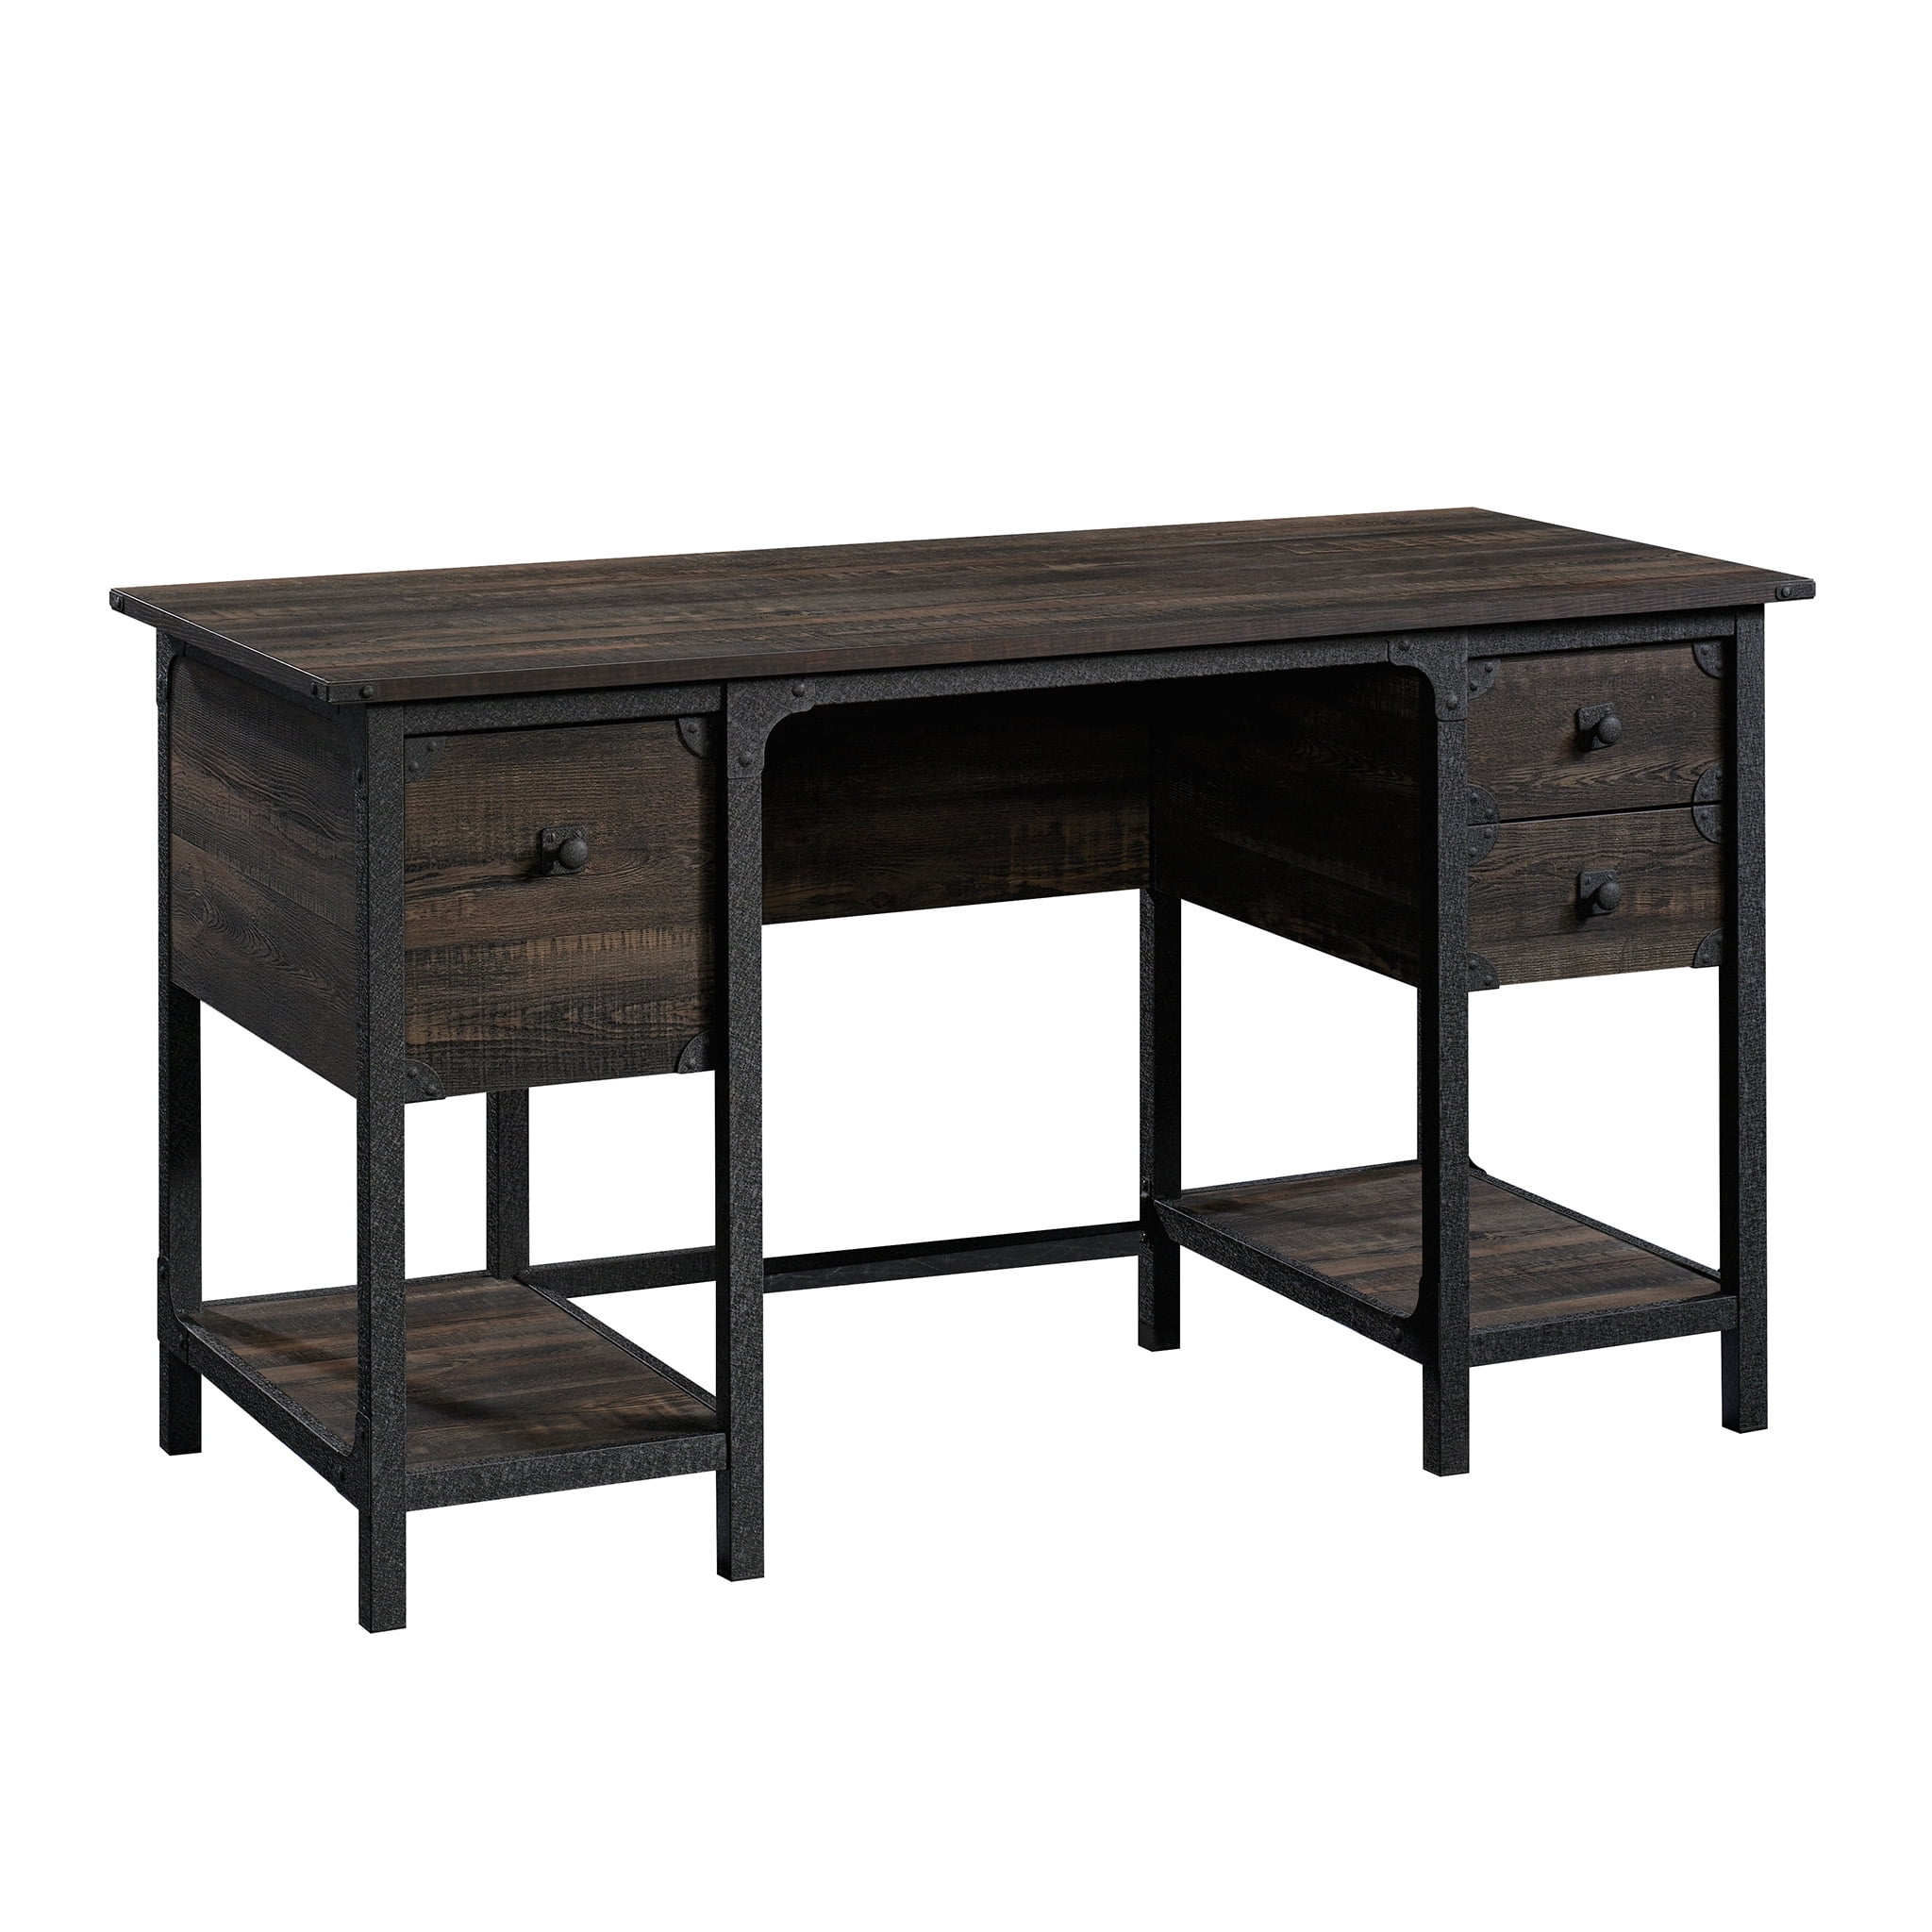 Charcoal Concrete + Steel Desk, custom made by Hard Goods  Classic office  furniture, Narrow desk, Home office furniture